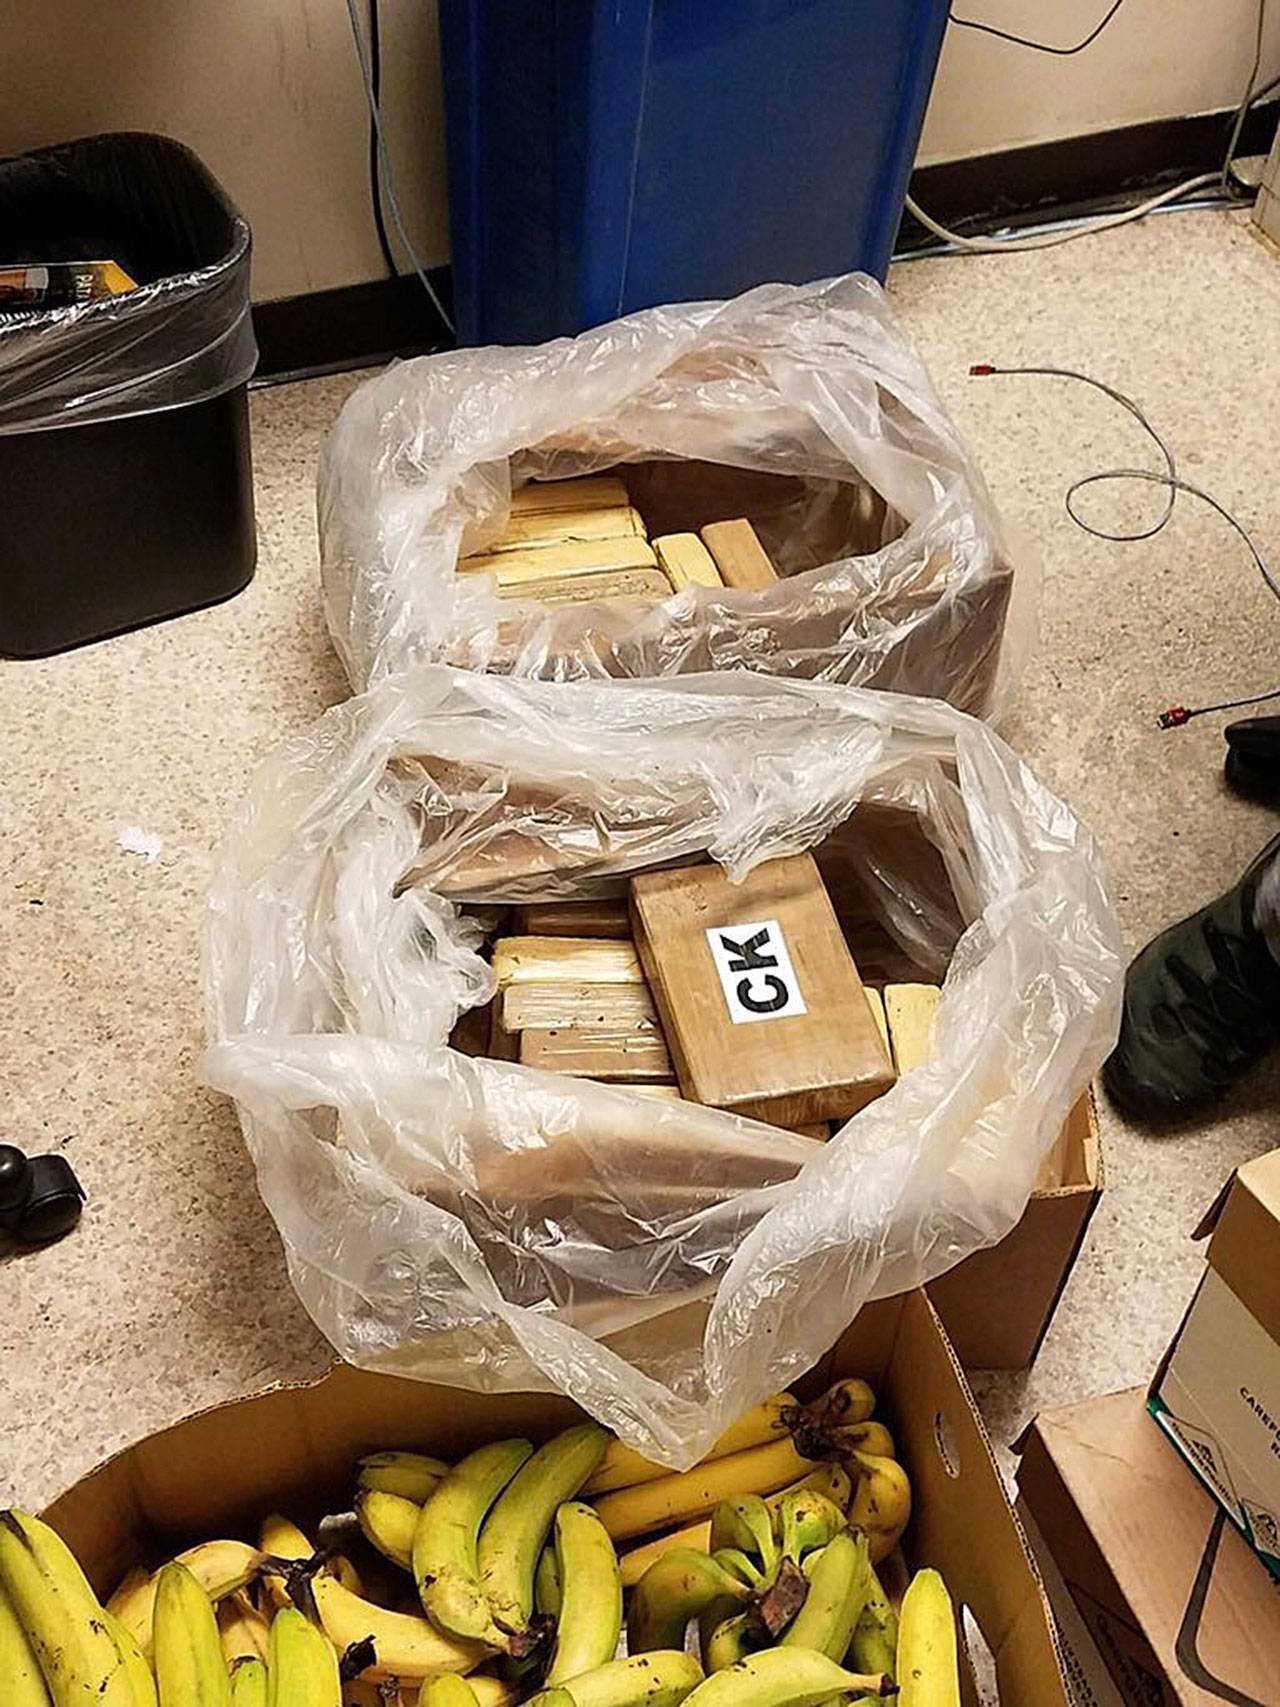 Woodinville Safeway employees discovered nearly 50 pounds of cocaine hidden in banana boxes on Sunday, Aug. 18. Photo courtesy of King County Sheriff’s Office